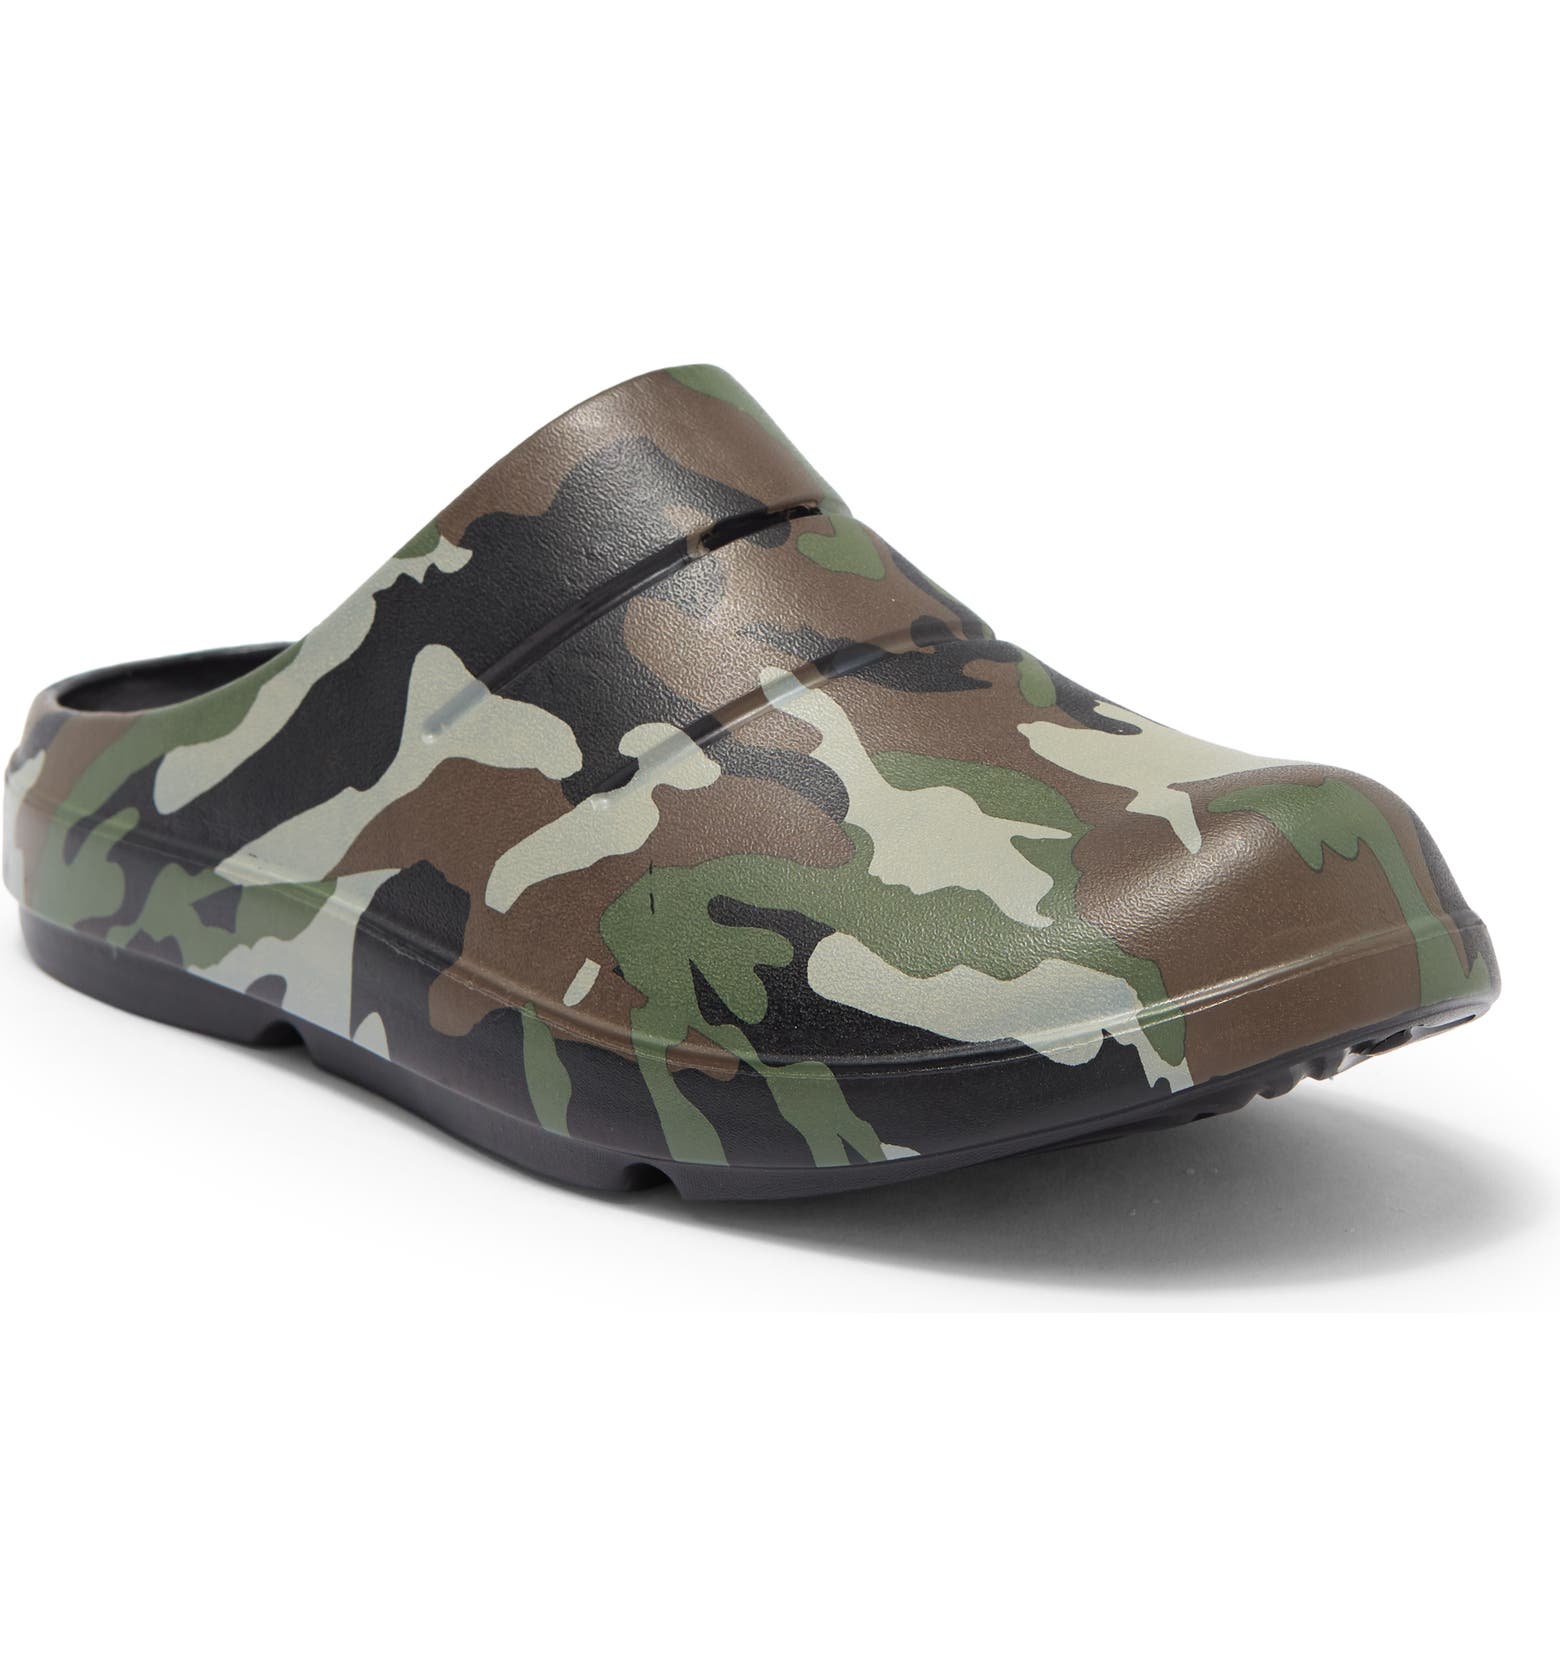 Winston Comfort Cushioned Clog on Sale At Nordstrom Rack